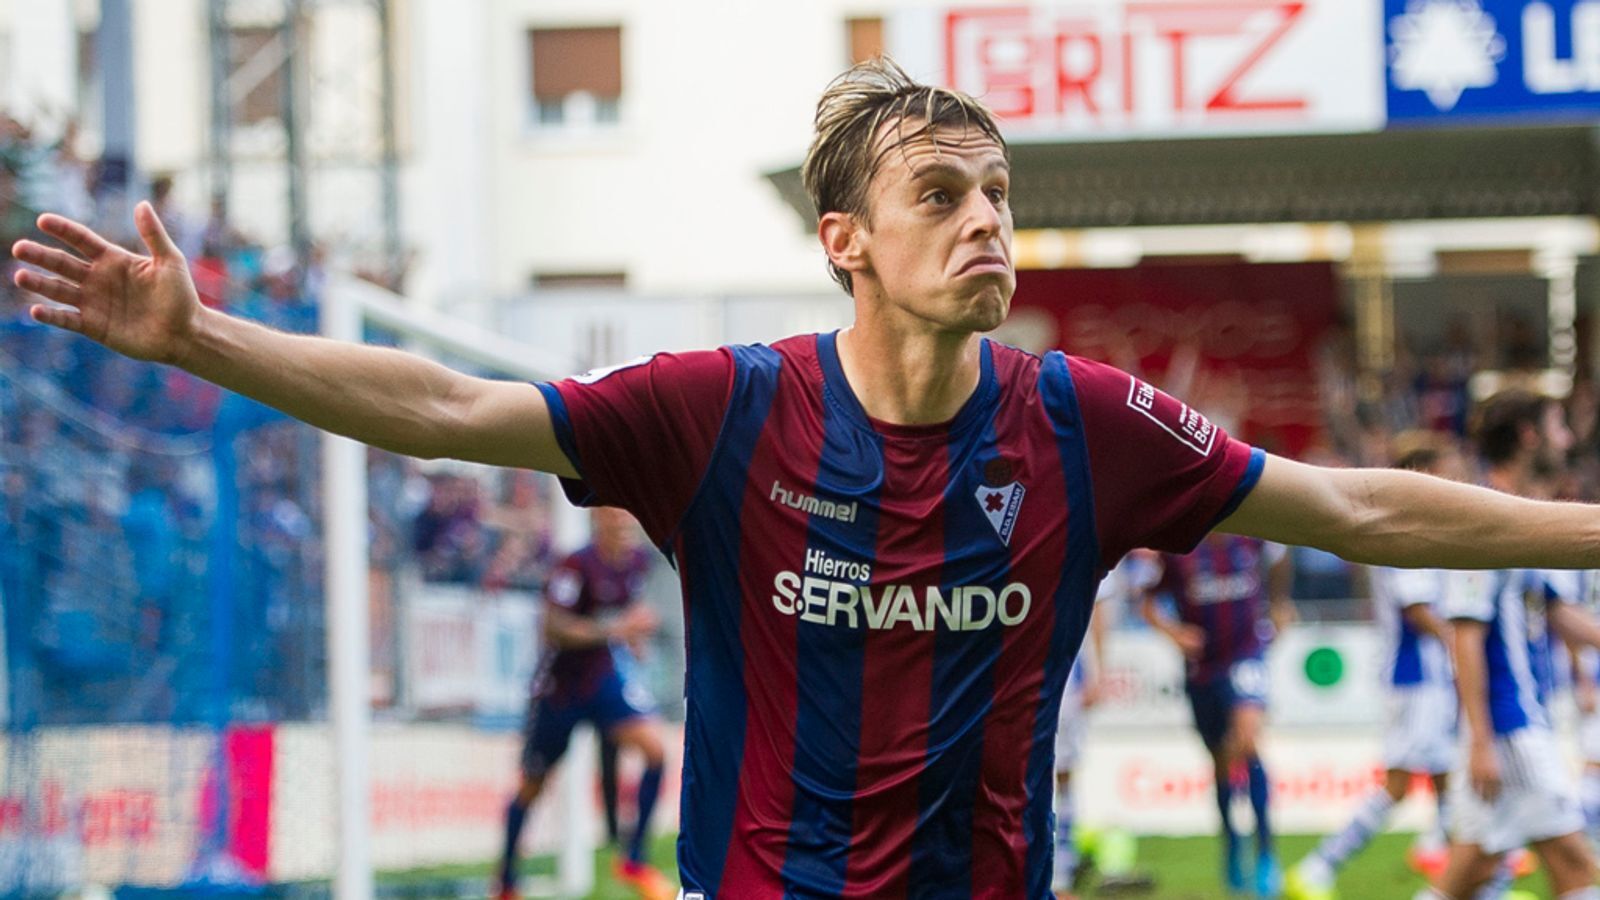 Granada Loses as Eibar Avoids the Relegation Zone with a Win